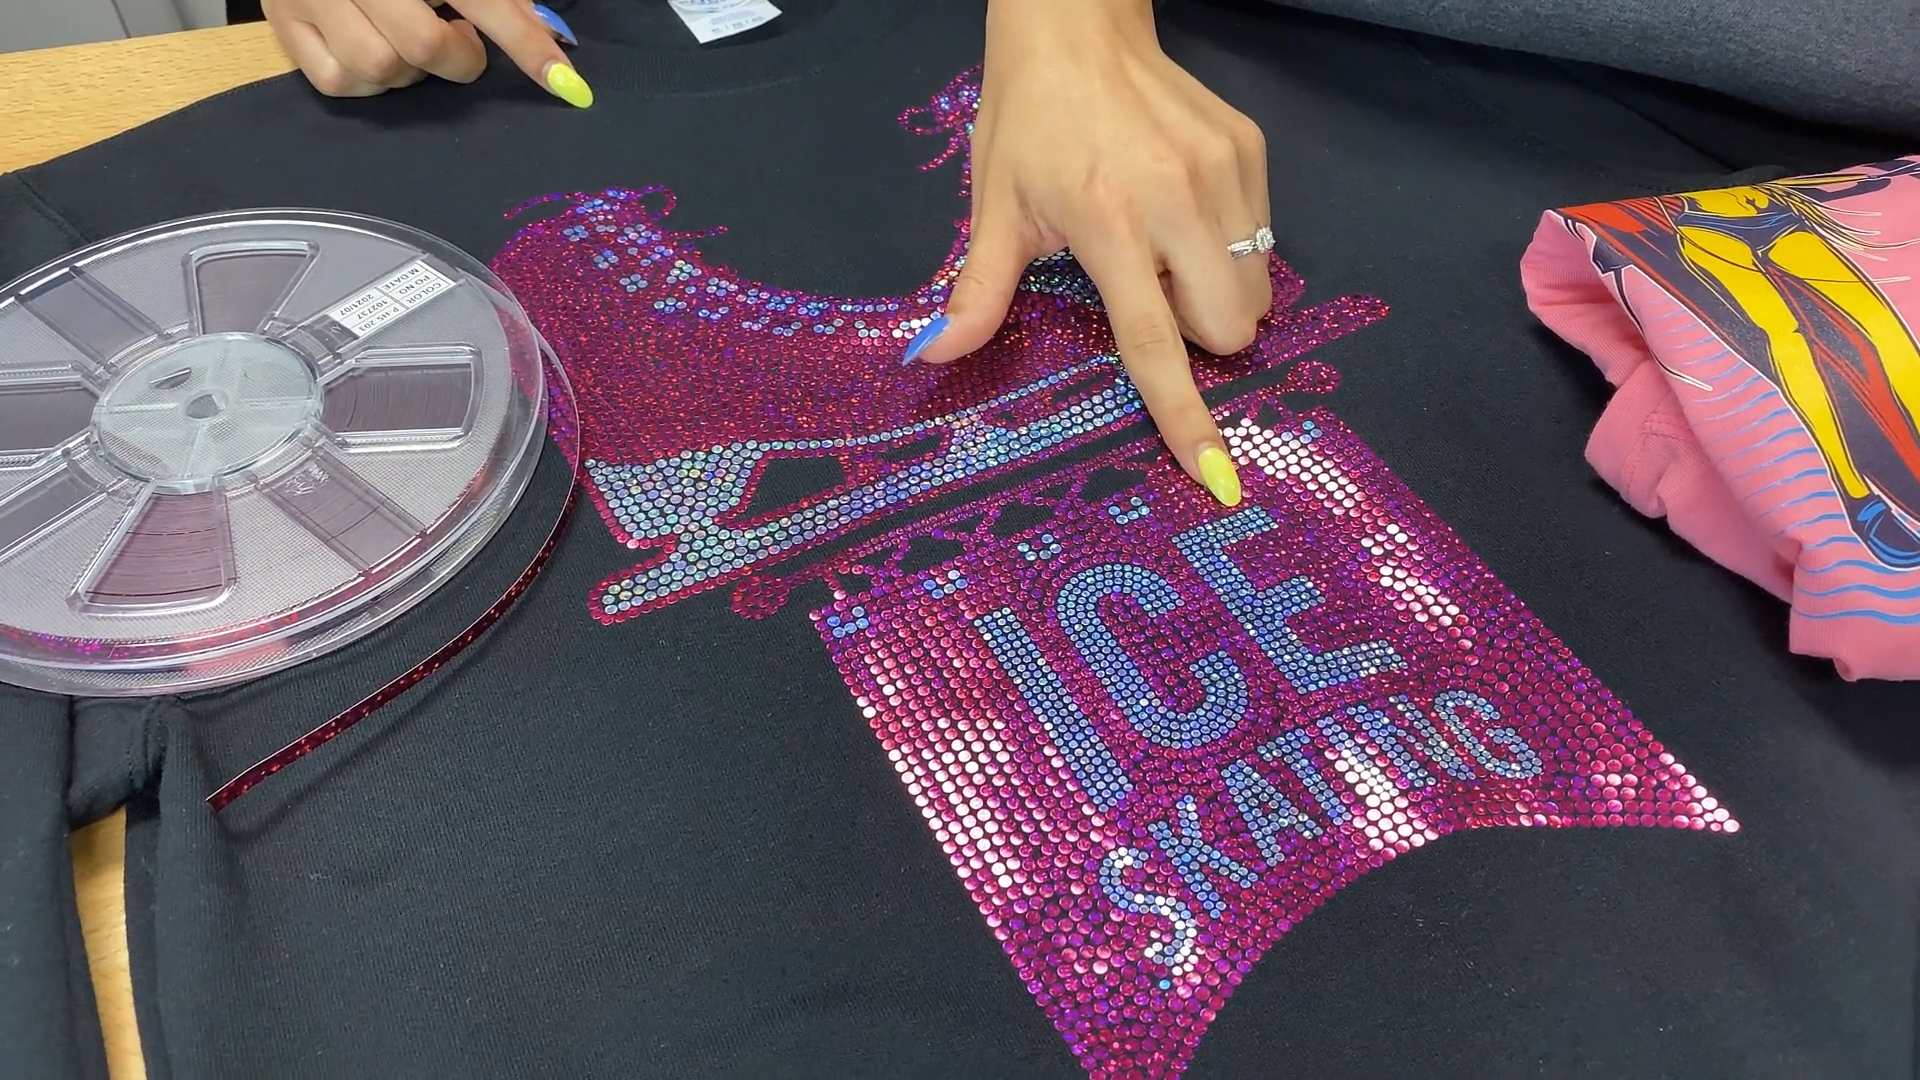 Extend Your Embroidery Product Lineup With Bling (DIY Clothing Embellishment)